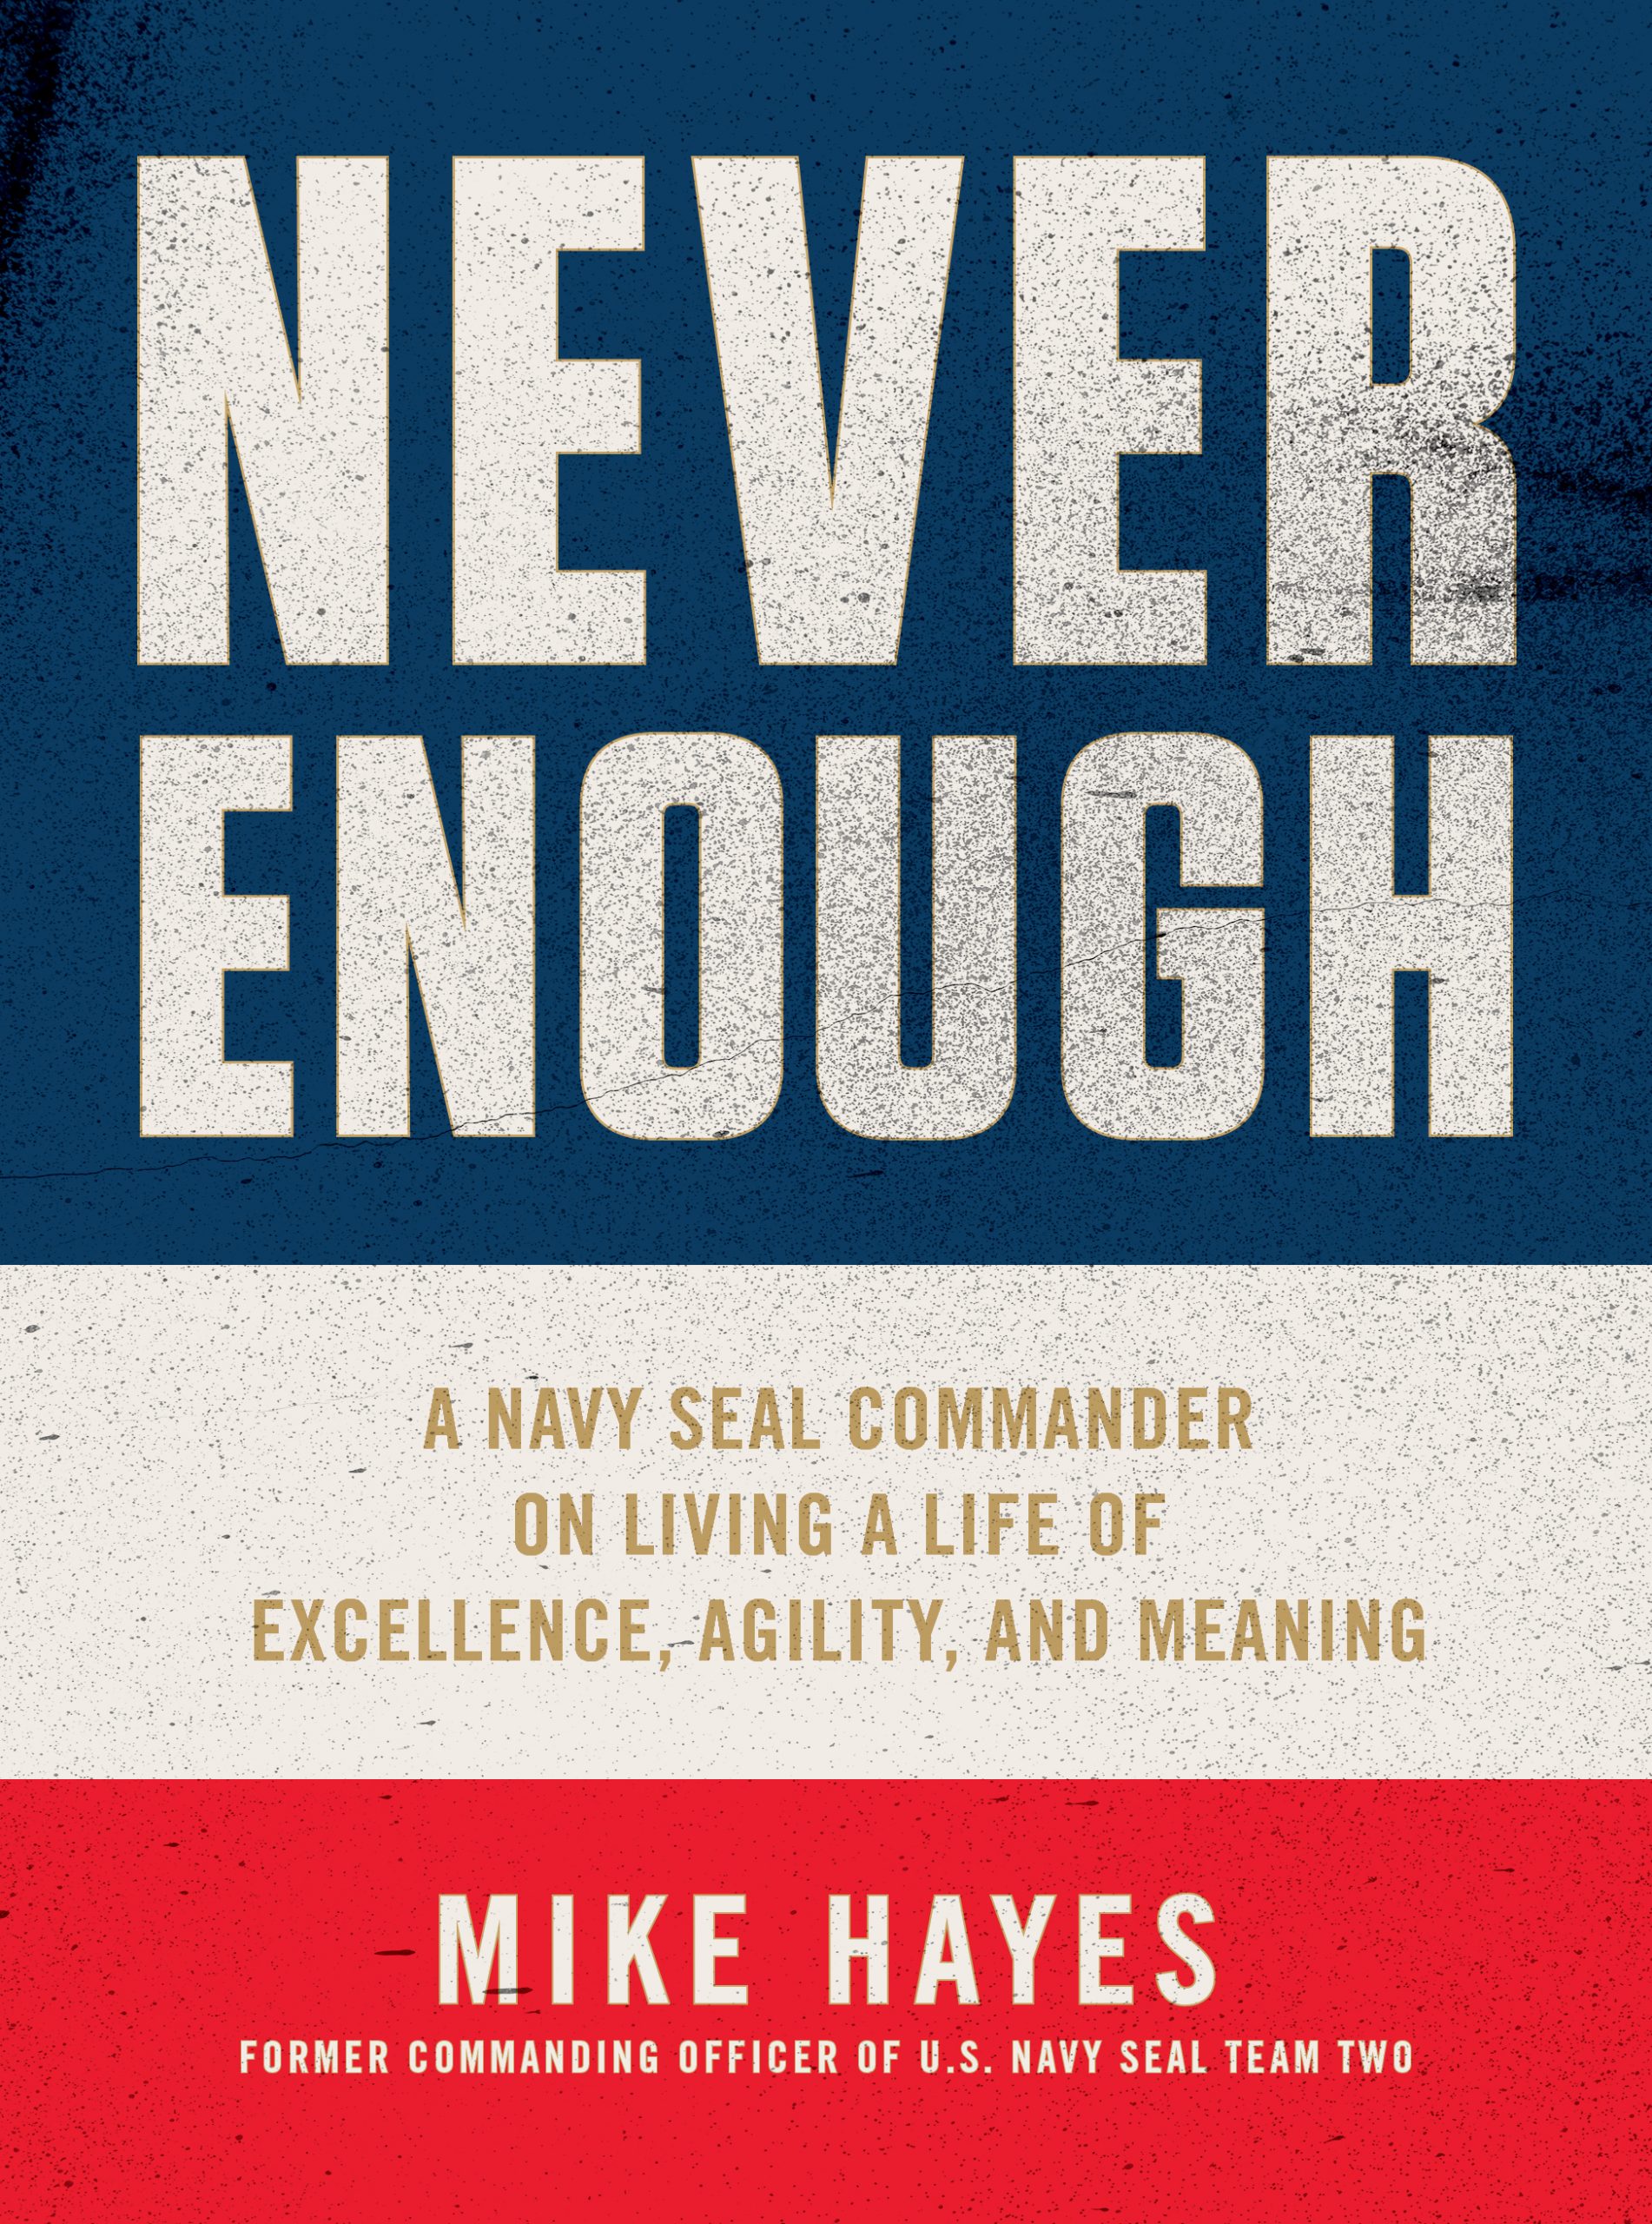 Never Enough by Mike Hayes